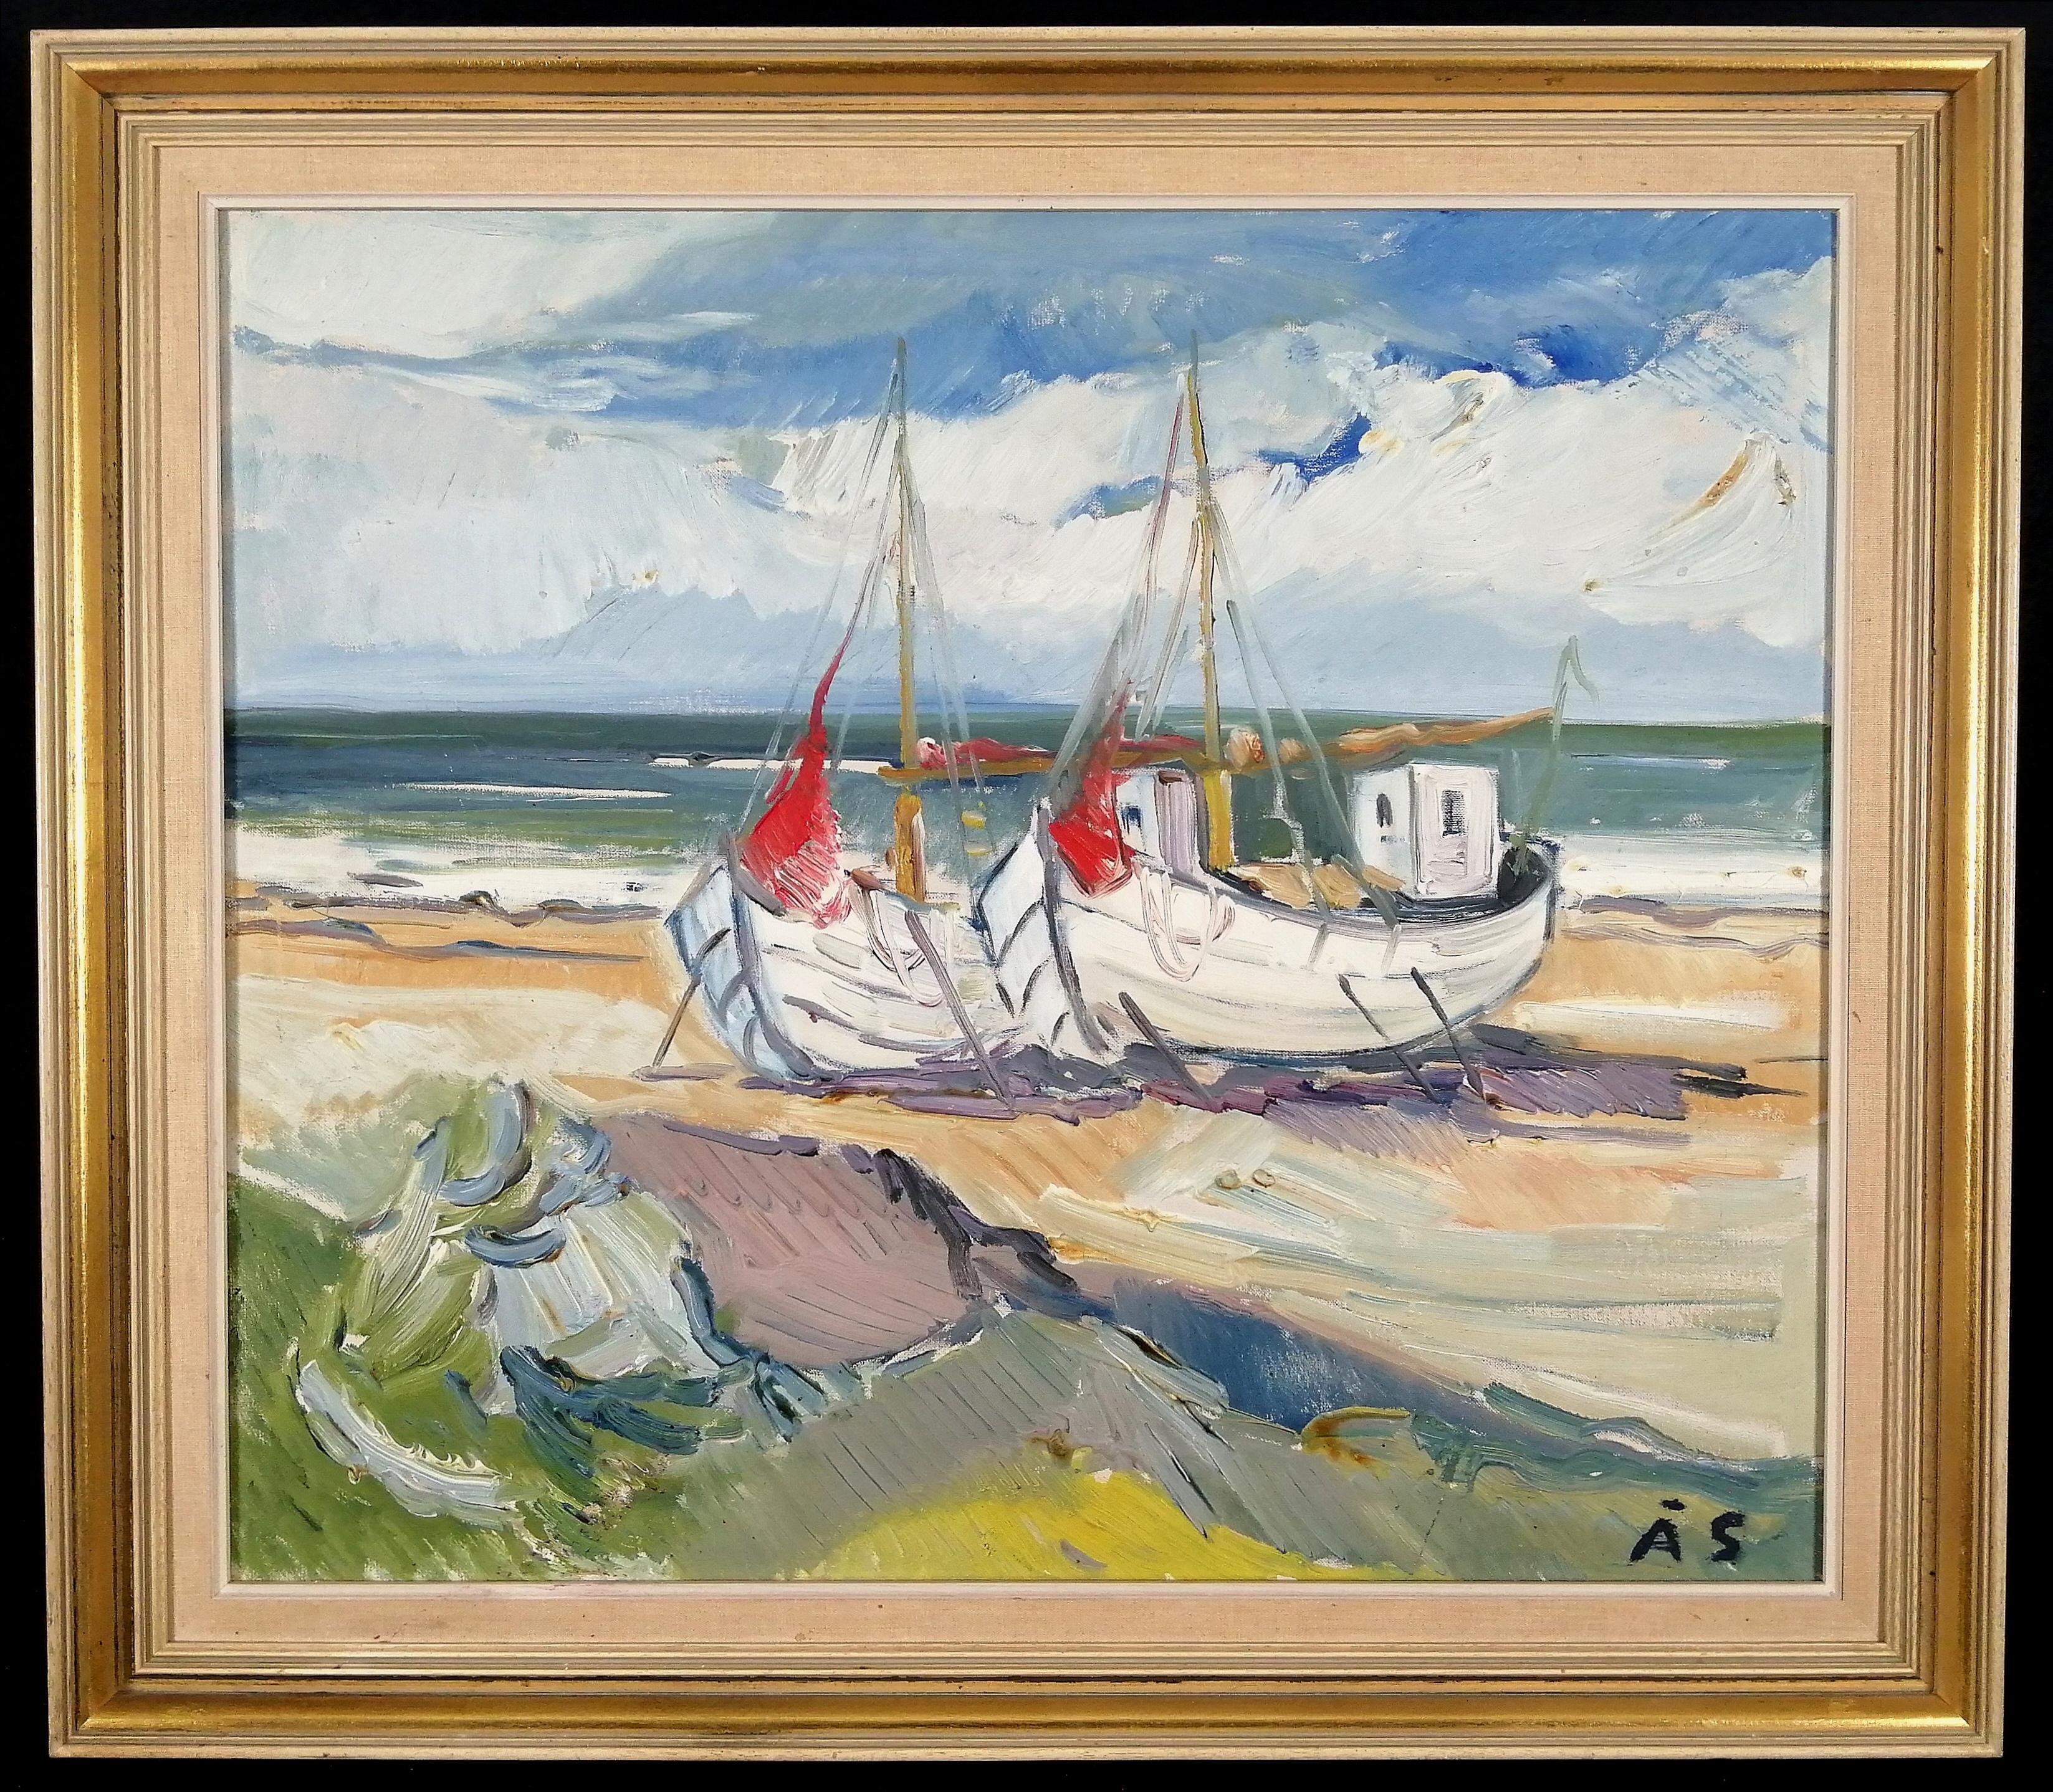 Aage Strand Landscape Painting - Boats on the Beach - Large Mid 20th Century Danish Oil on Canvas Painting